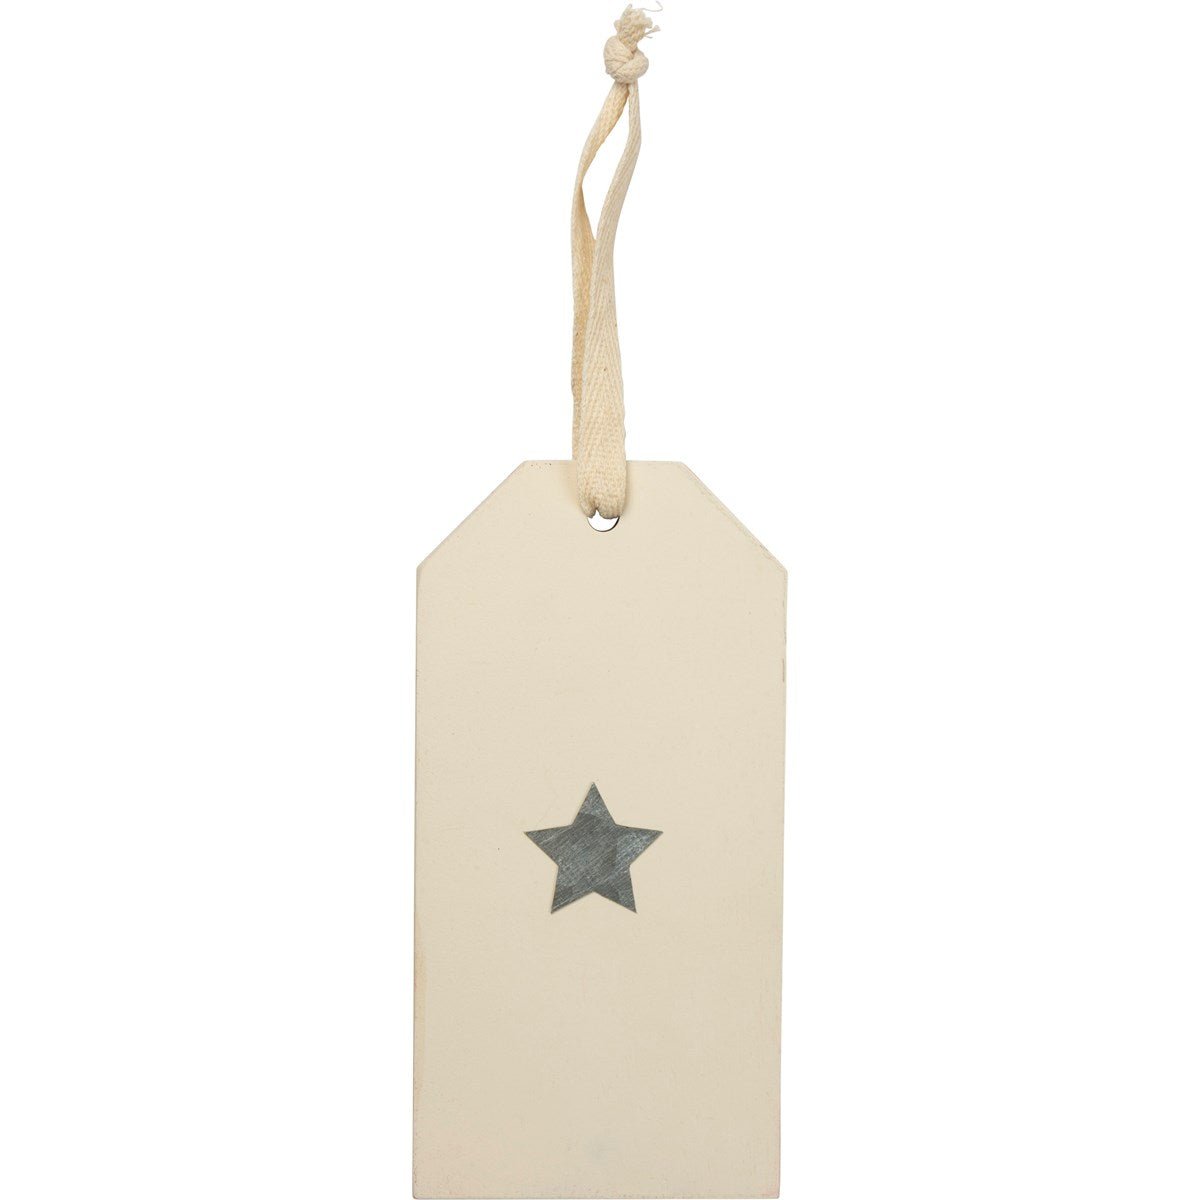 We All Deserve An Alcoholiday Wooden Wine Bottle Tag